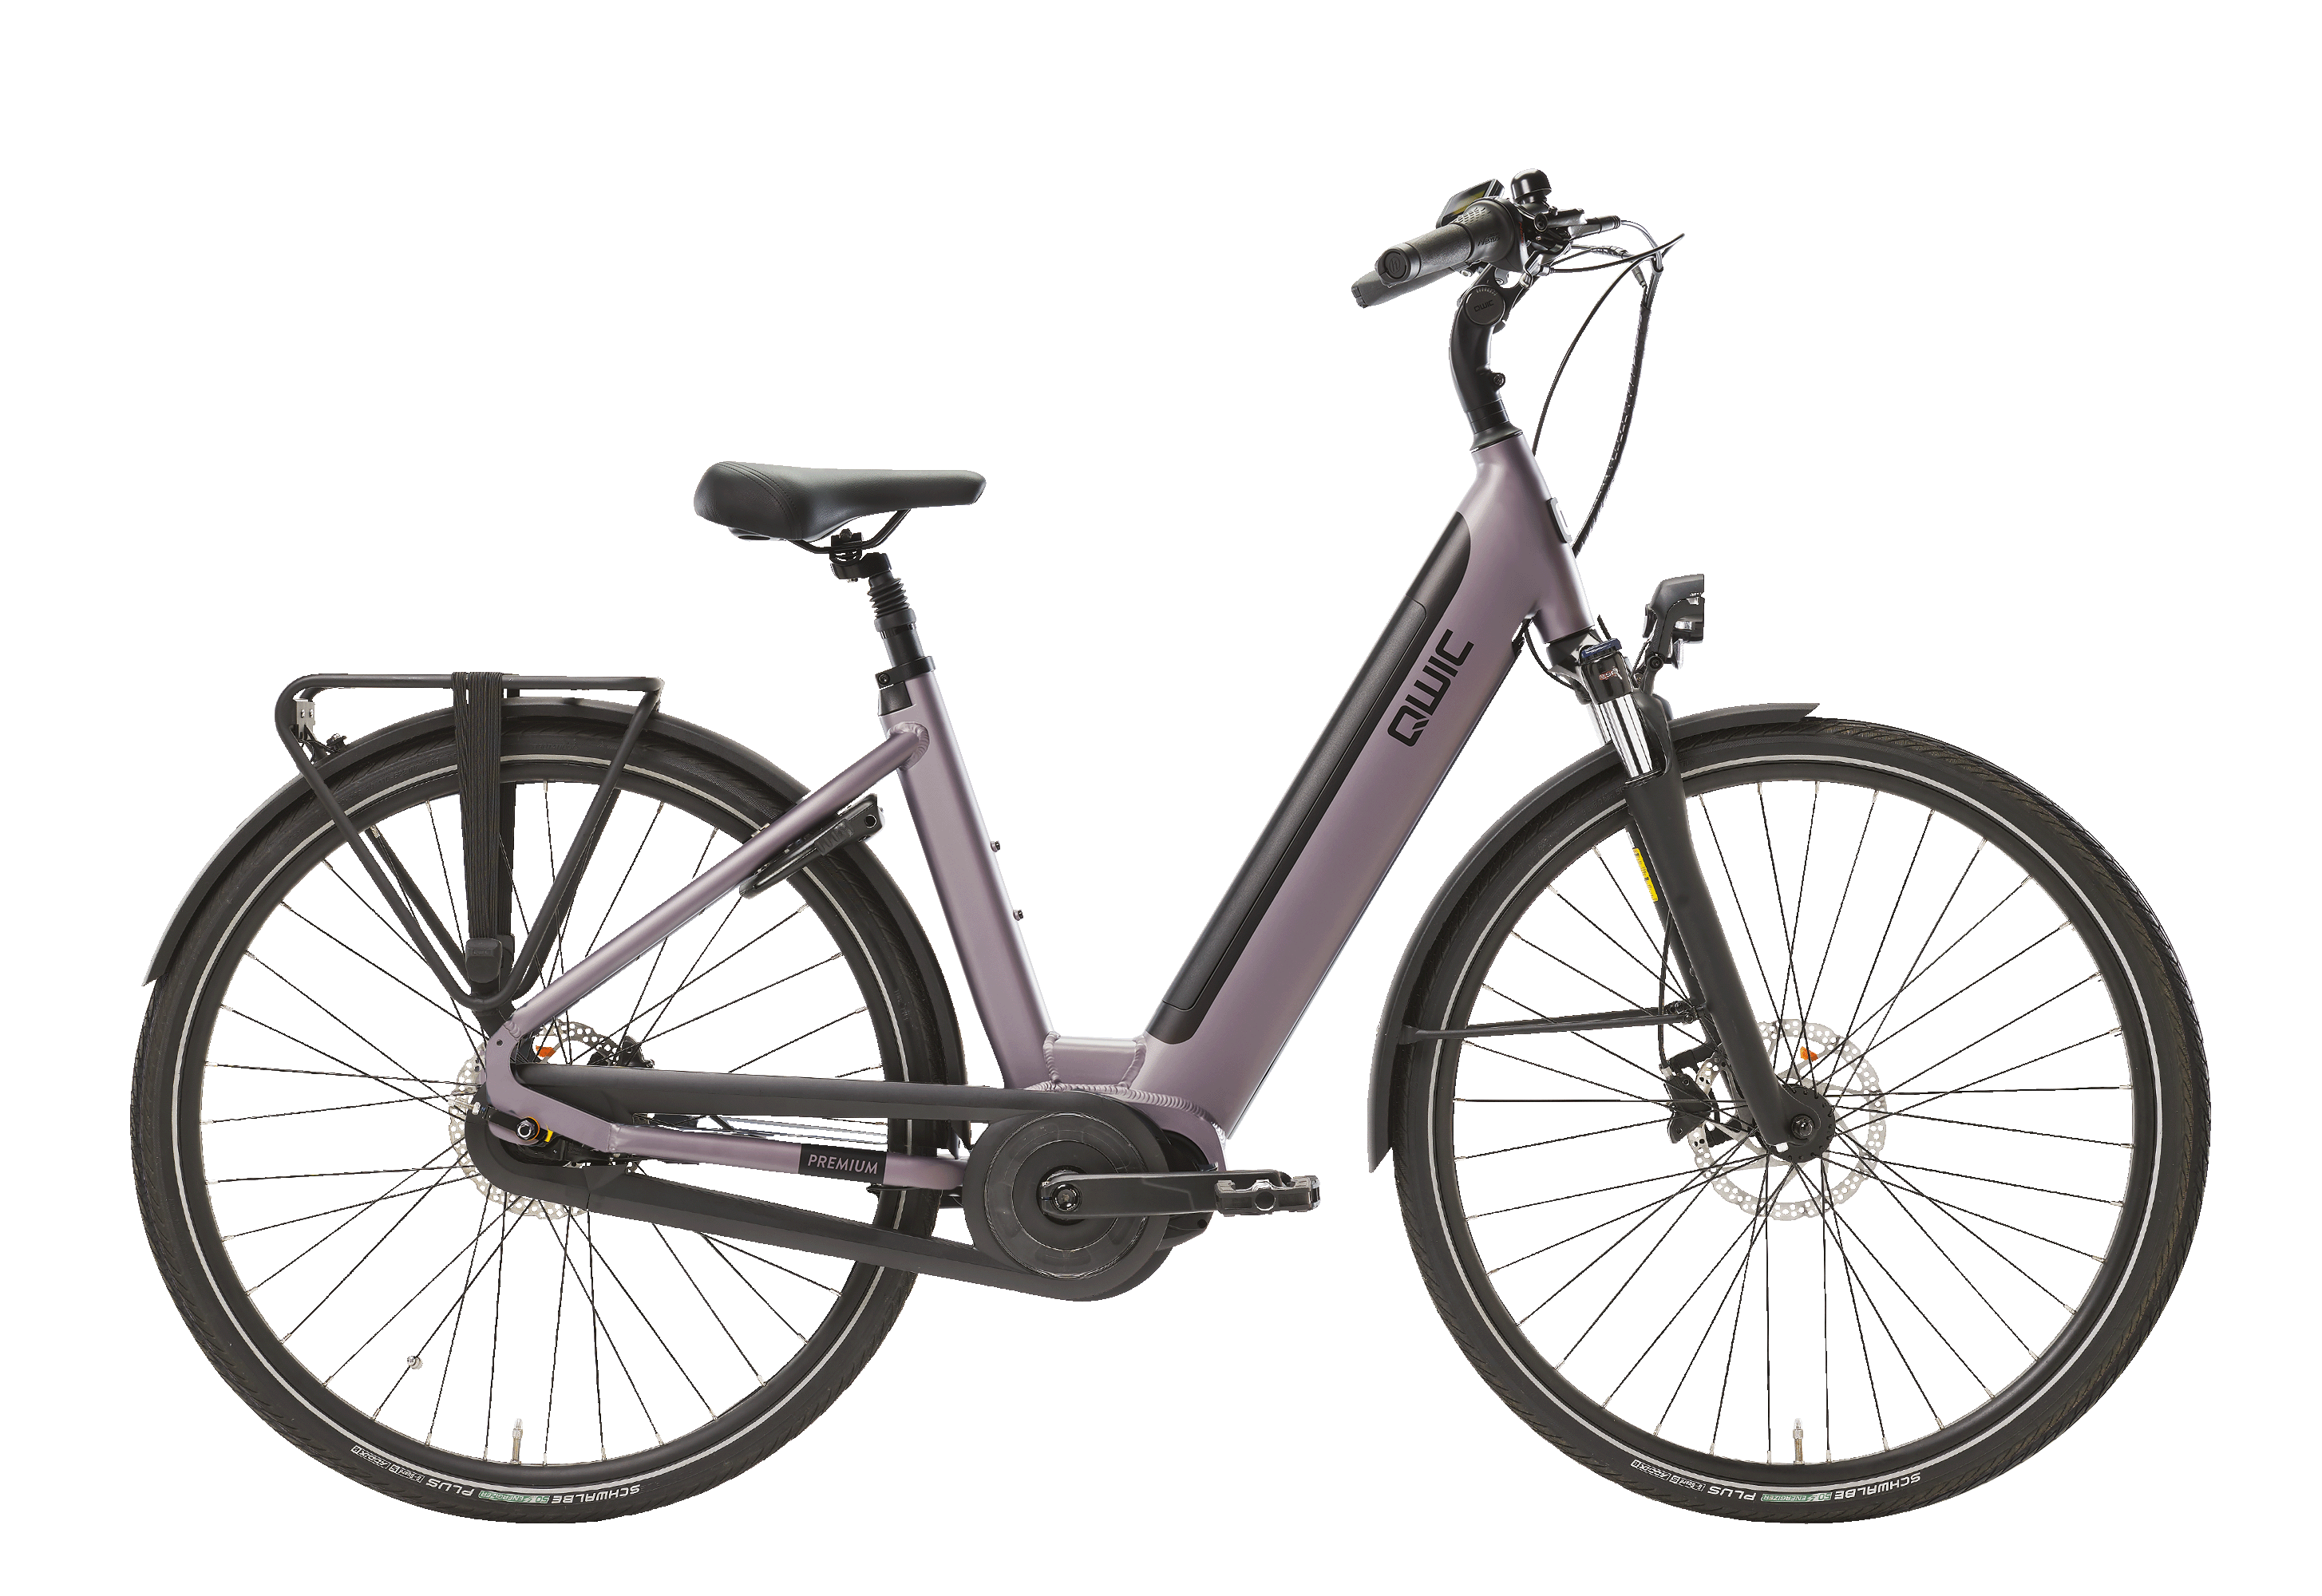 Premium i | A comfortable e-bike with an exceptional design | QWIC